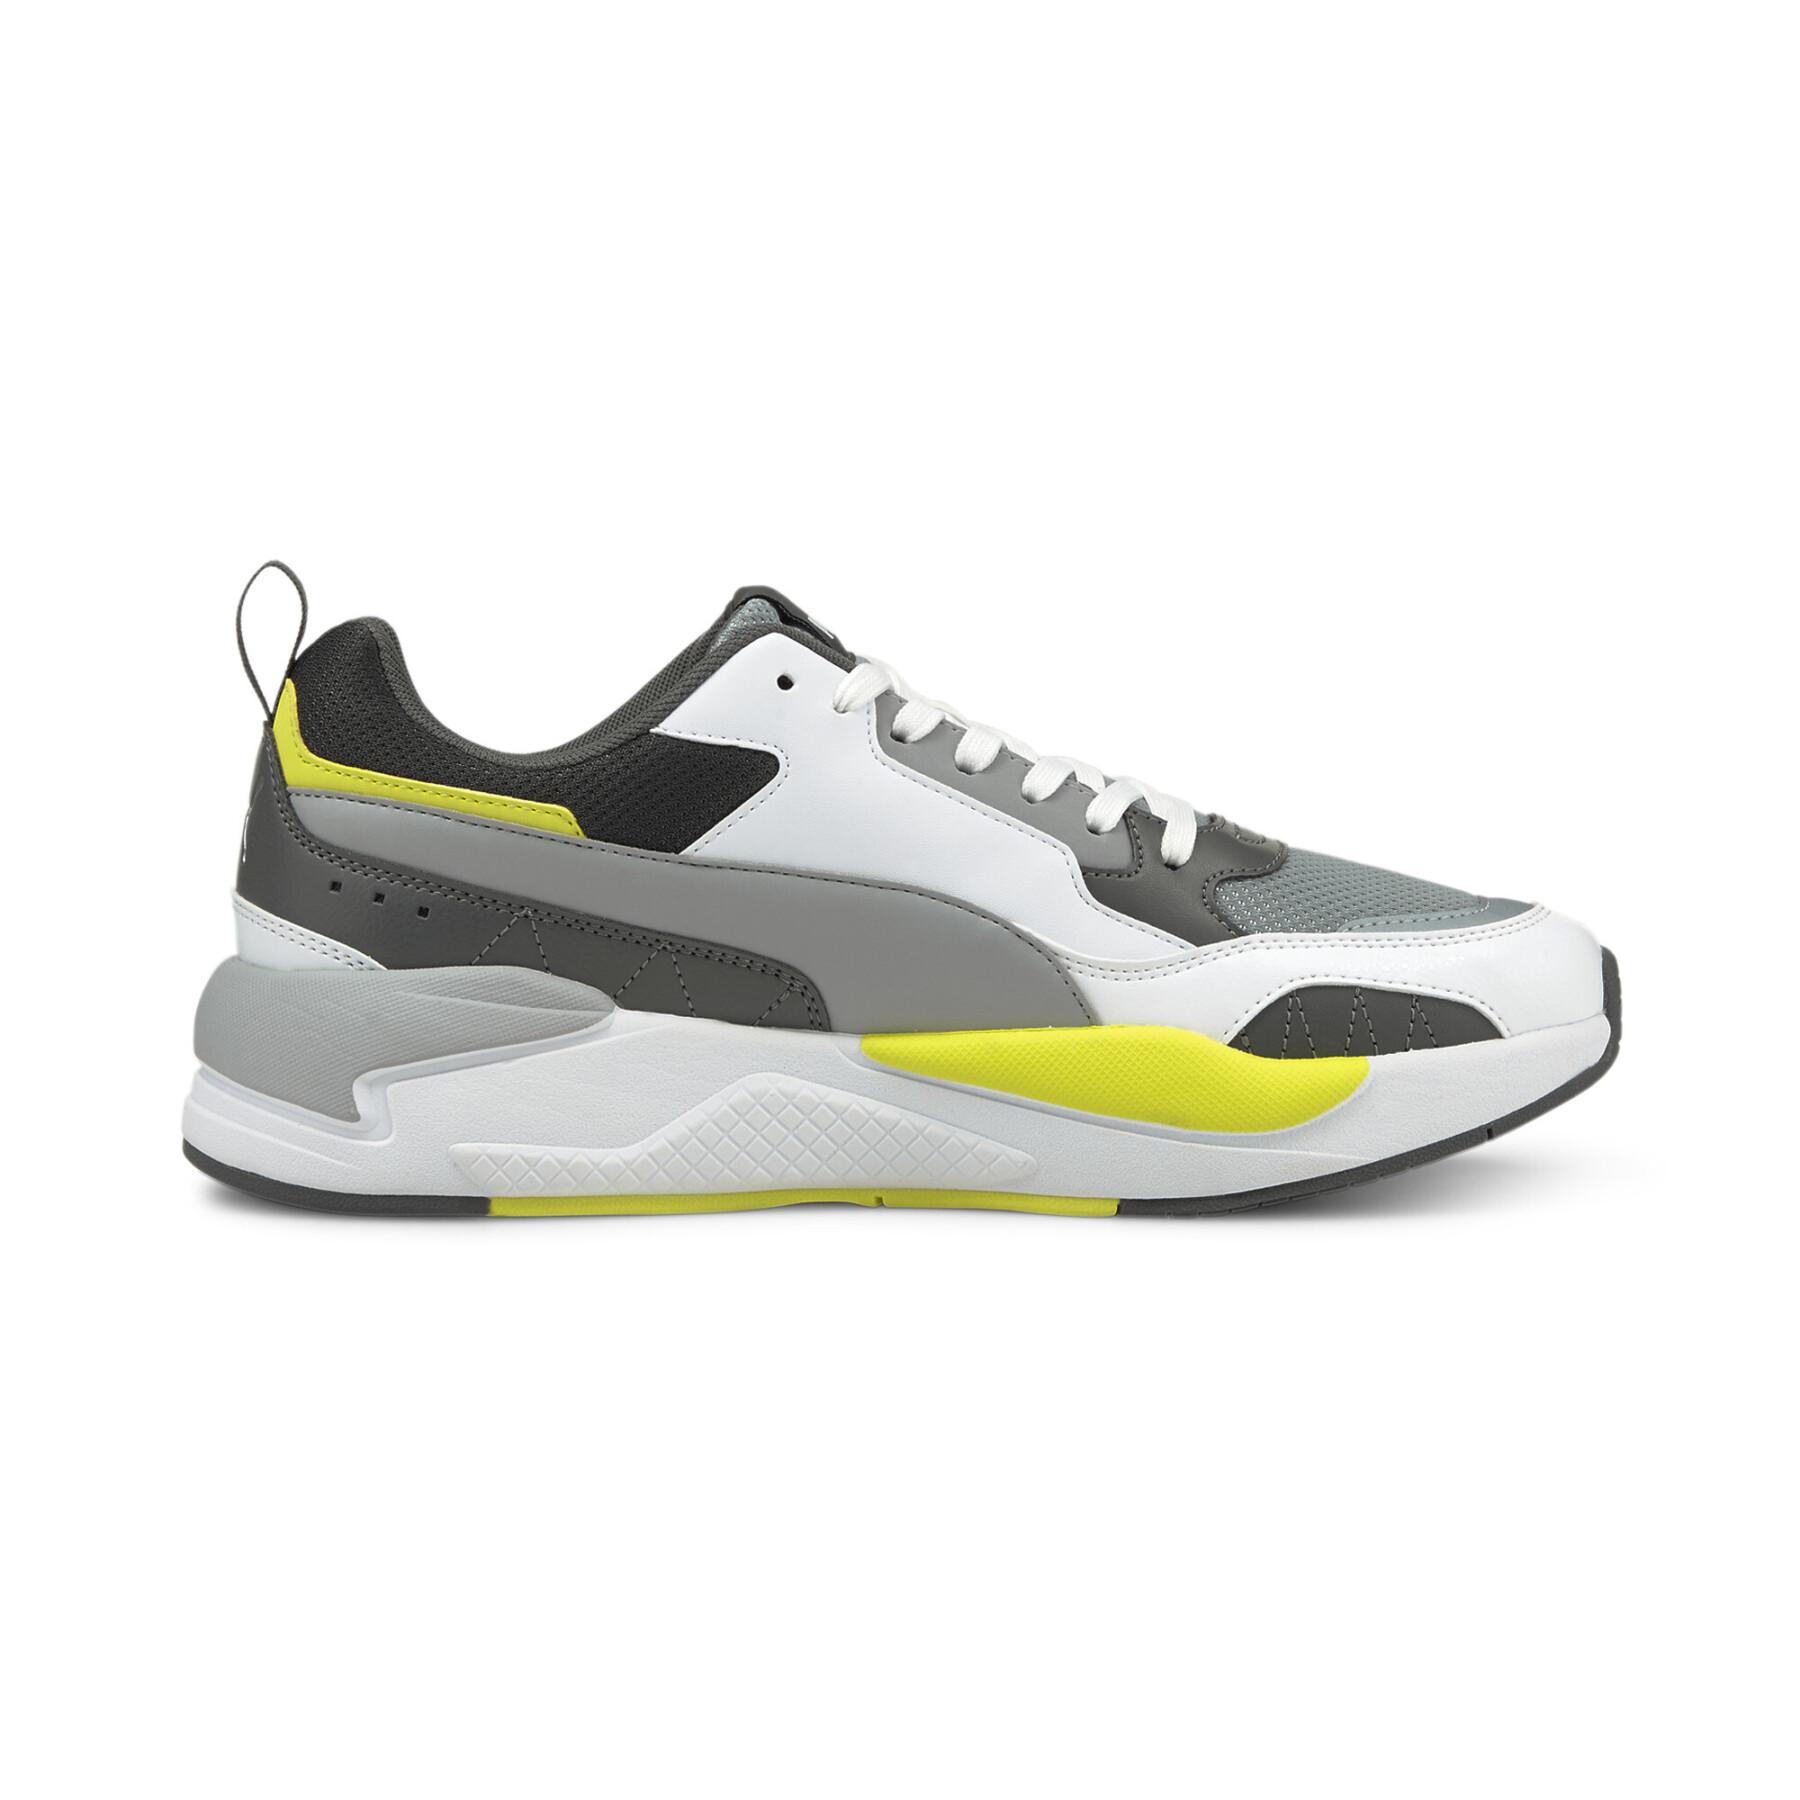 Sneakers Puma X-Ray 2 Square